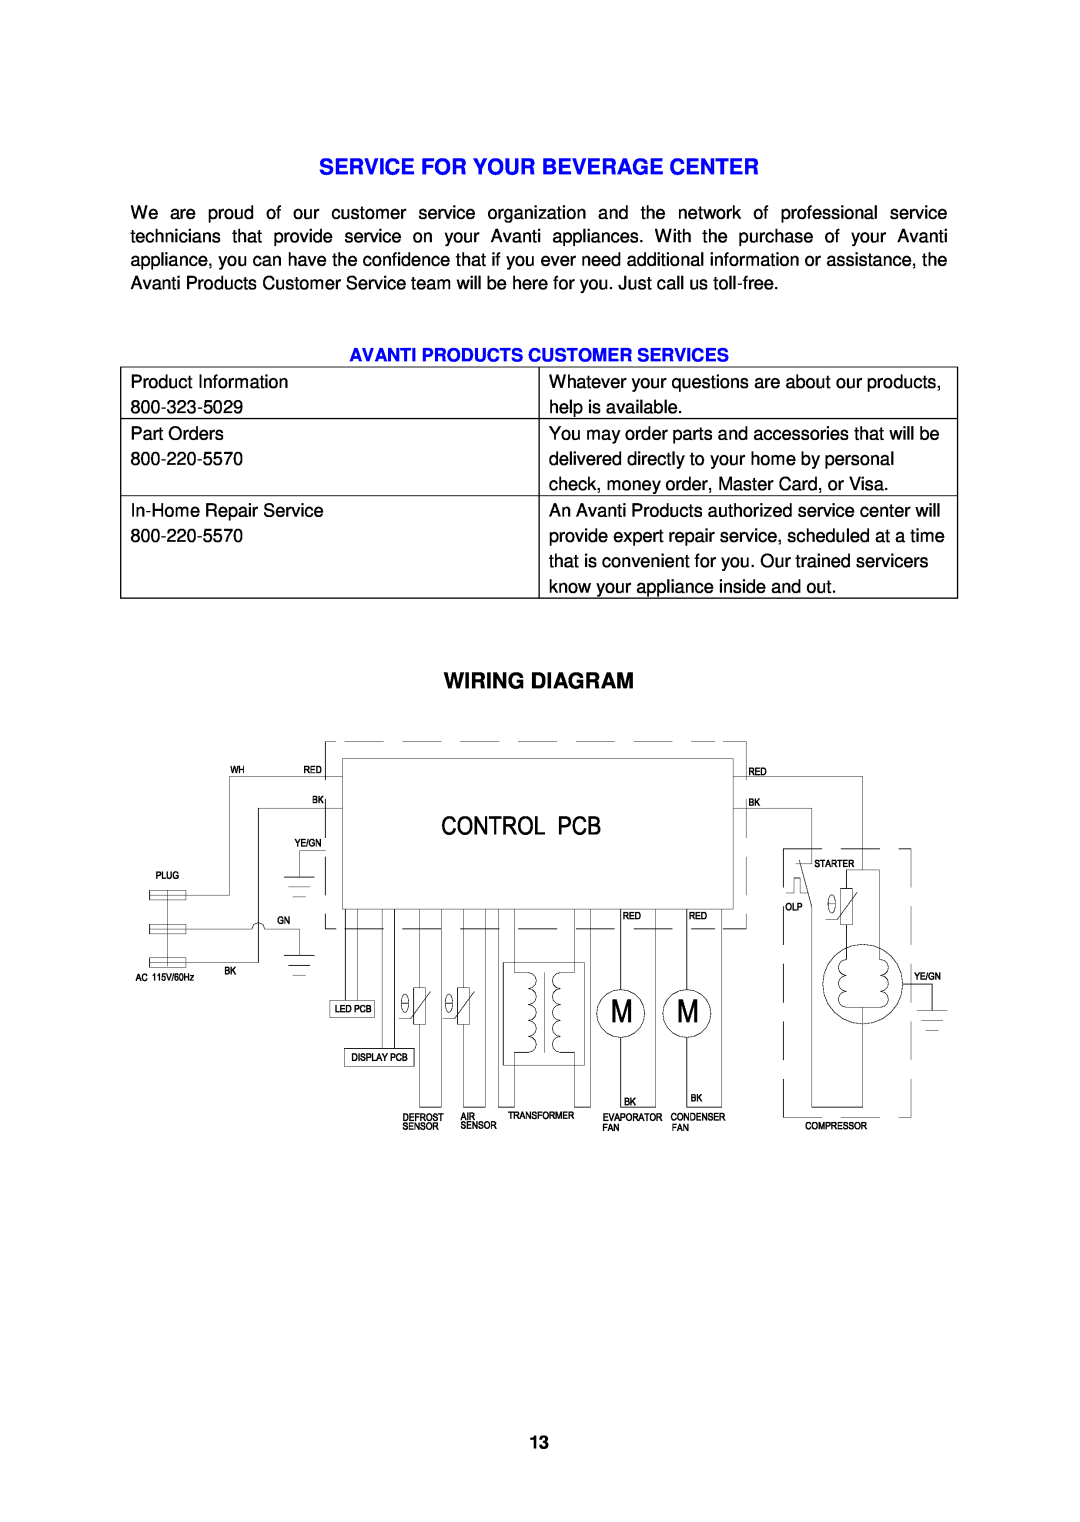 Avanti BCA1501SS instruction manual Service For Your Beverage Center, Wiring Diagram, Avanti Products Customer Services 